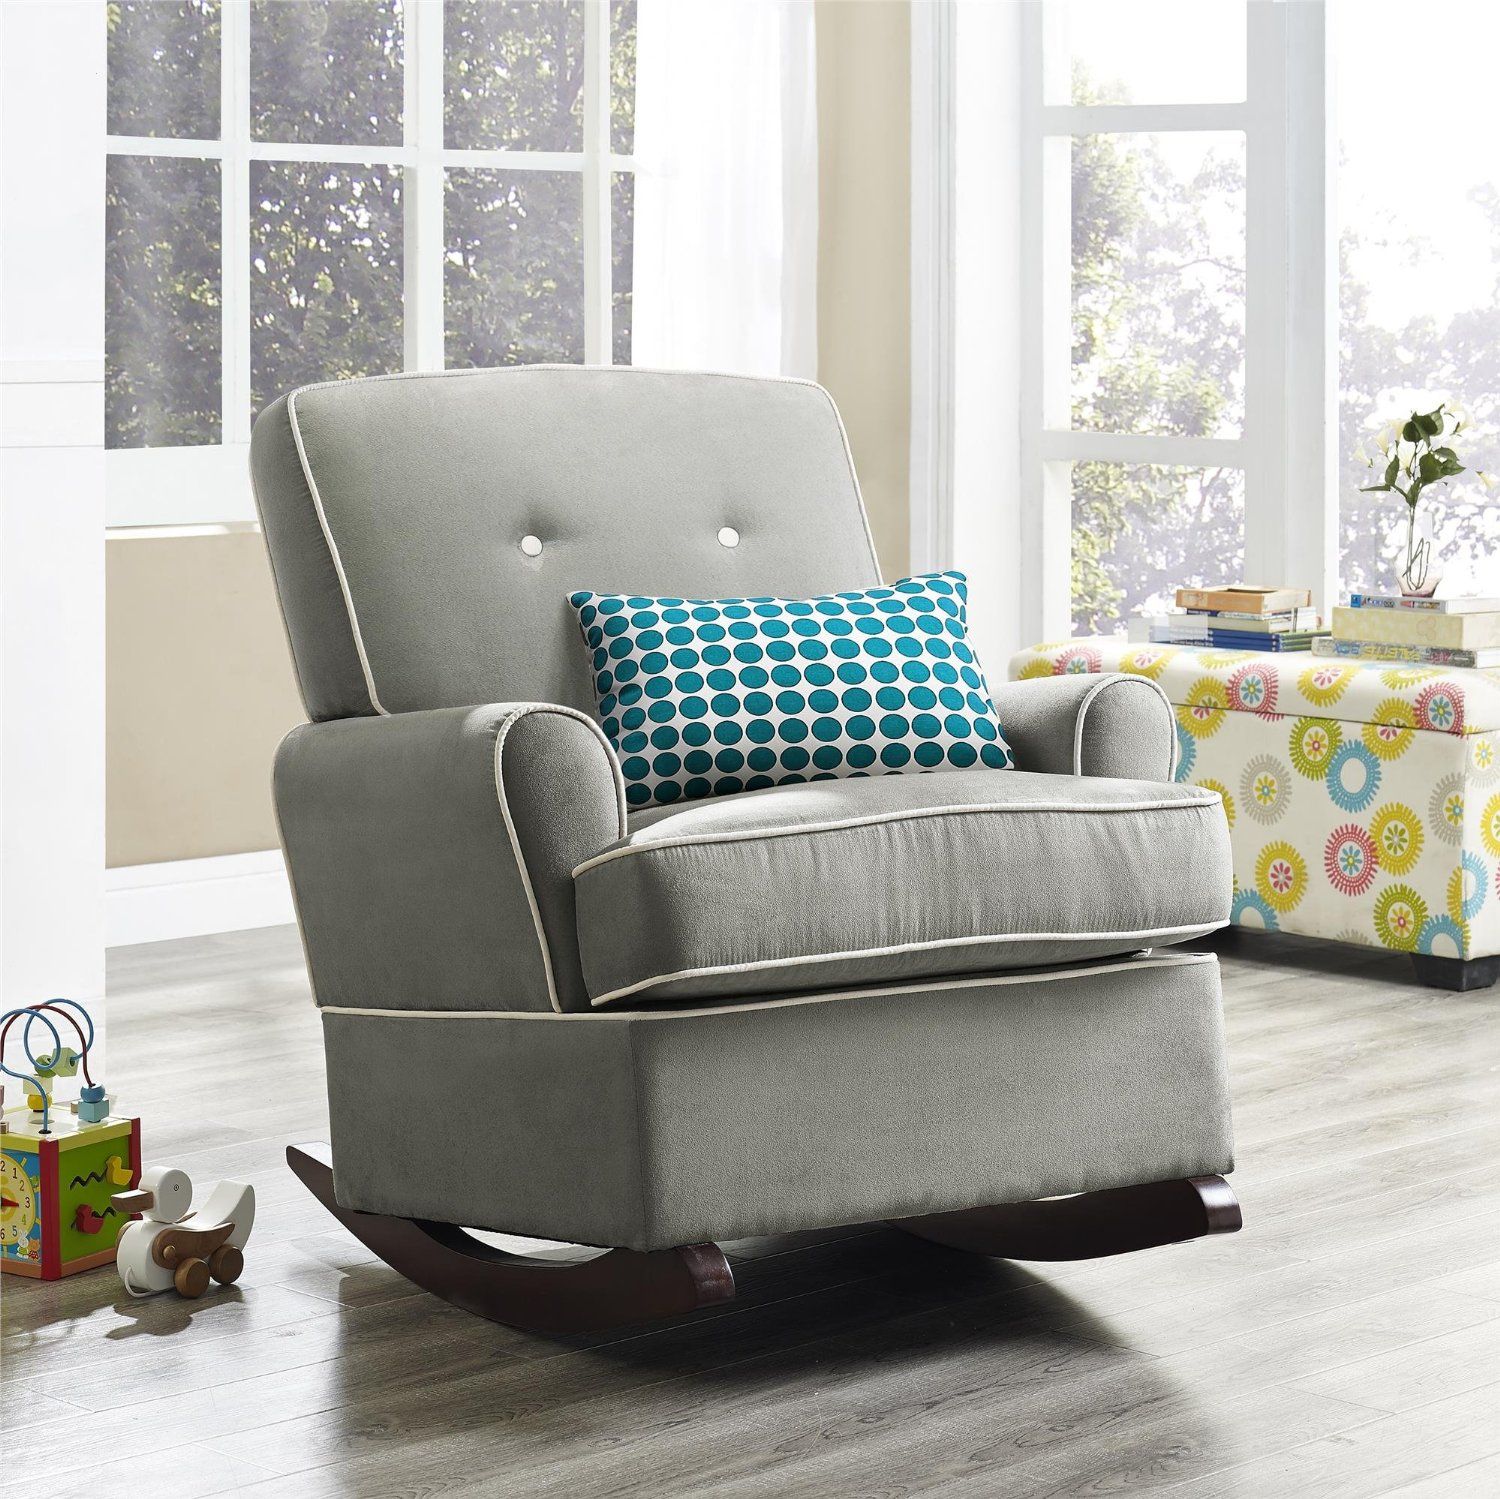 The Best Upholstered Rocking Chair 2018 | Best Rocking Chairs In Rocking Chairs Arm Chairs For Living And Nursery Room (View 6 of 20)